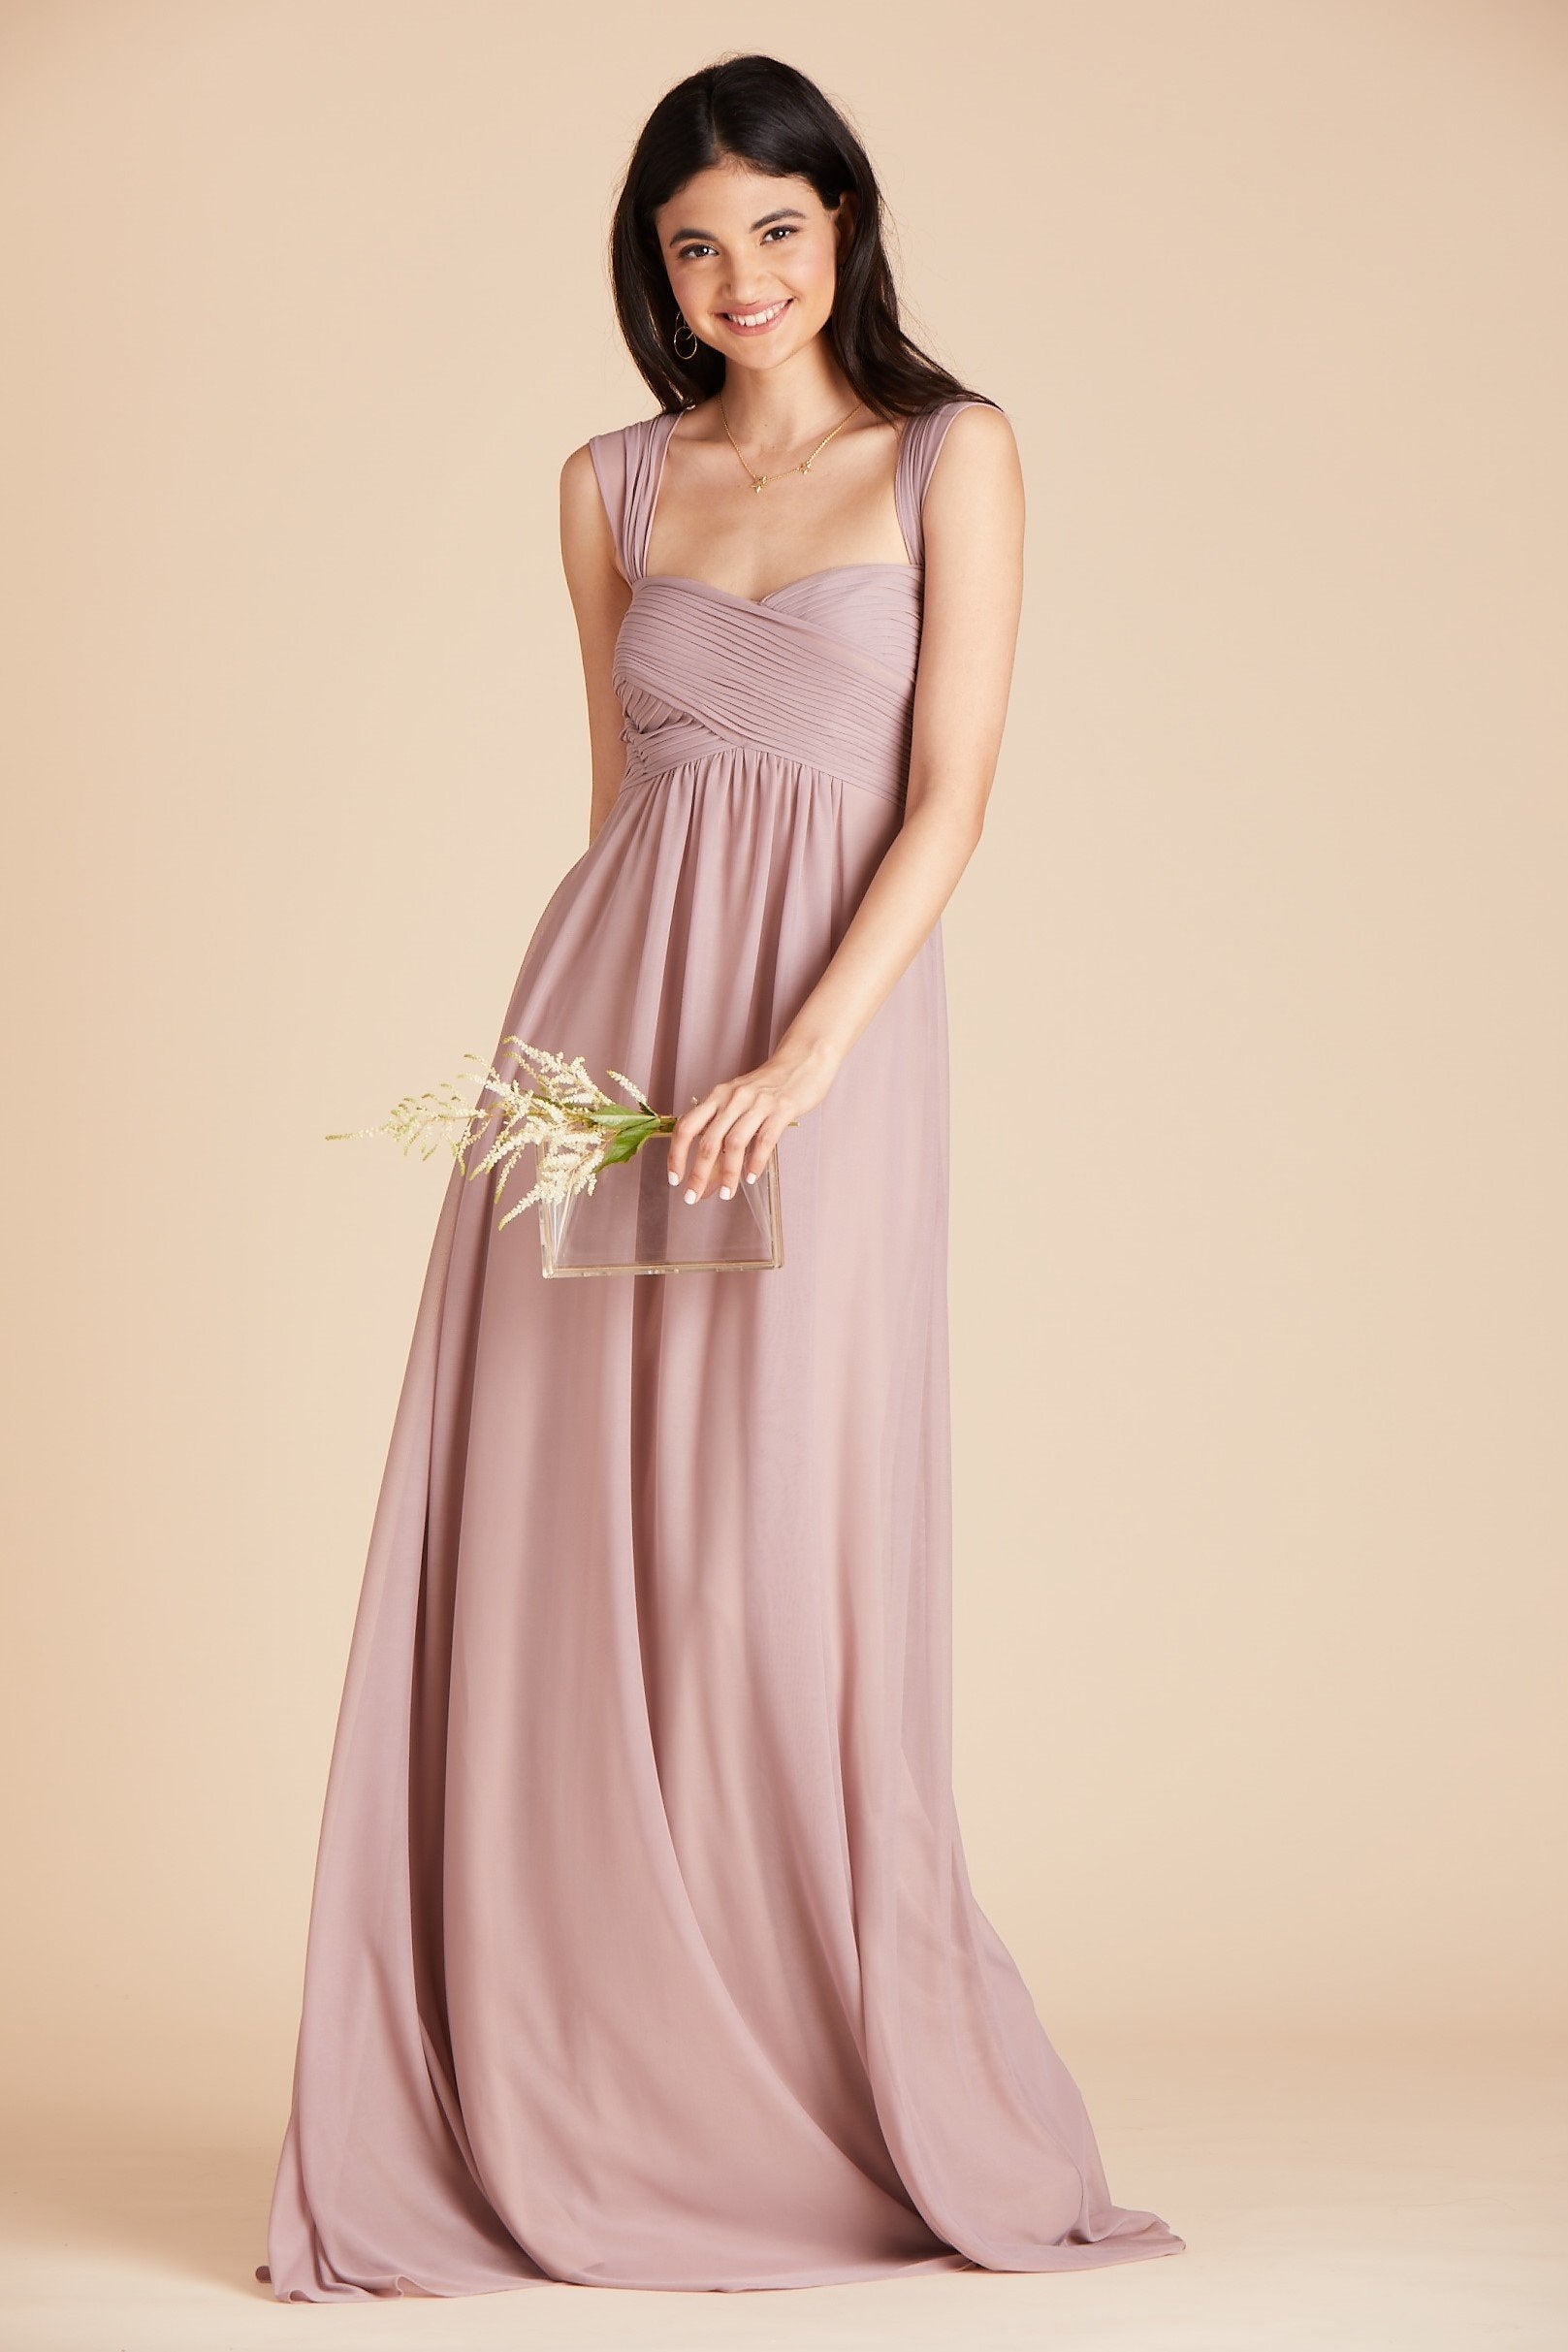 Maria convertible bridesmaids dress in mauve chiffon by Birdy Grey, front view